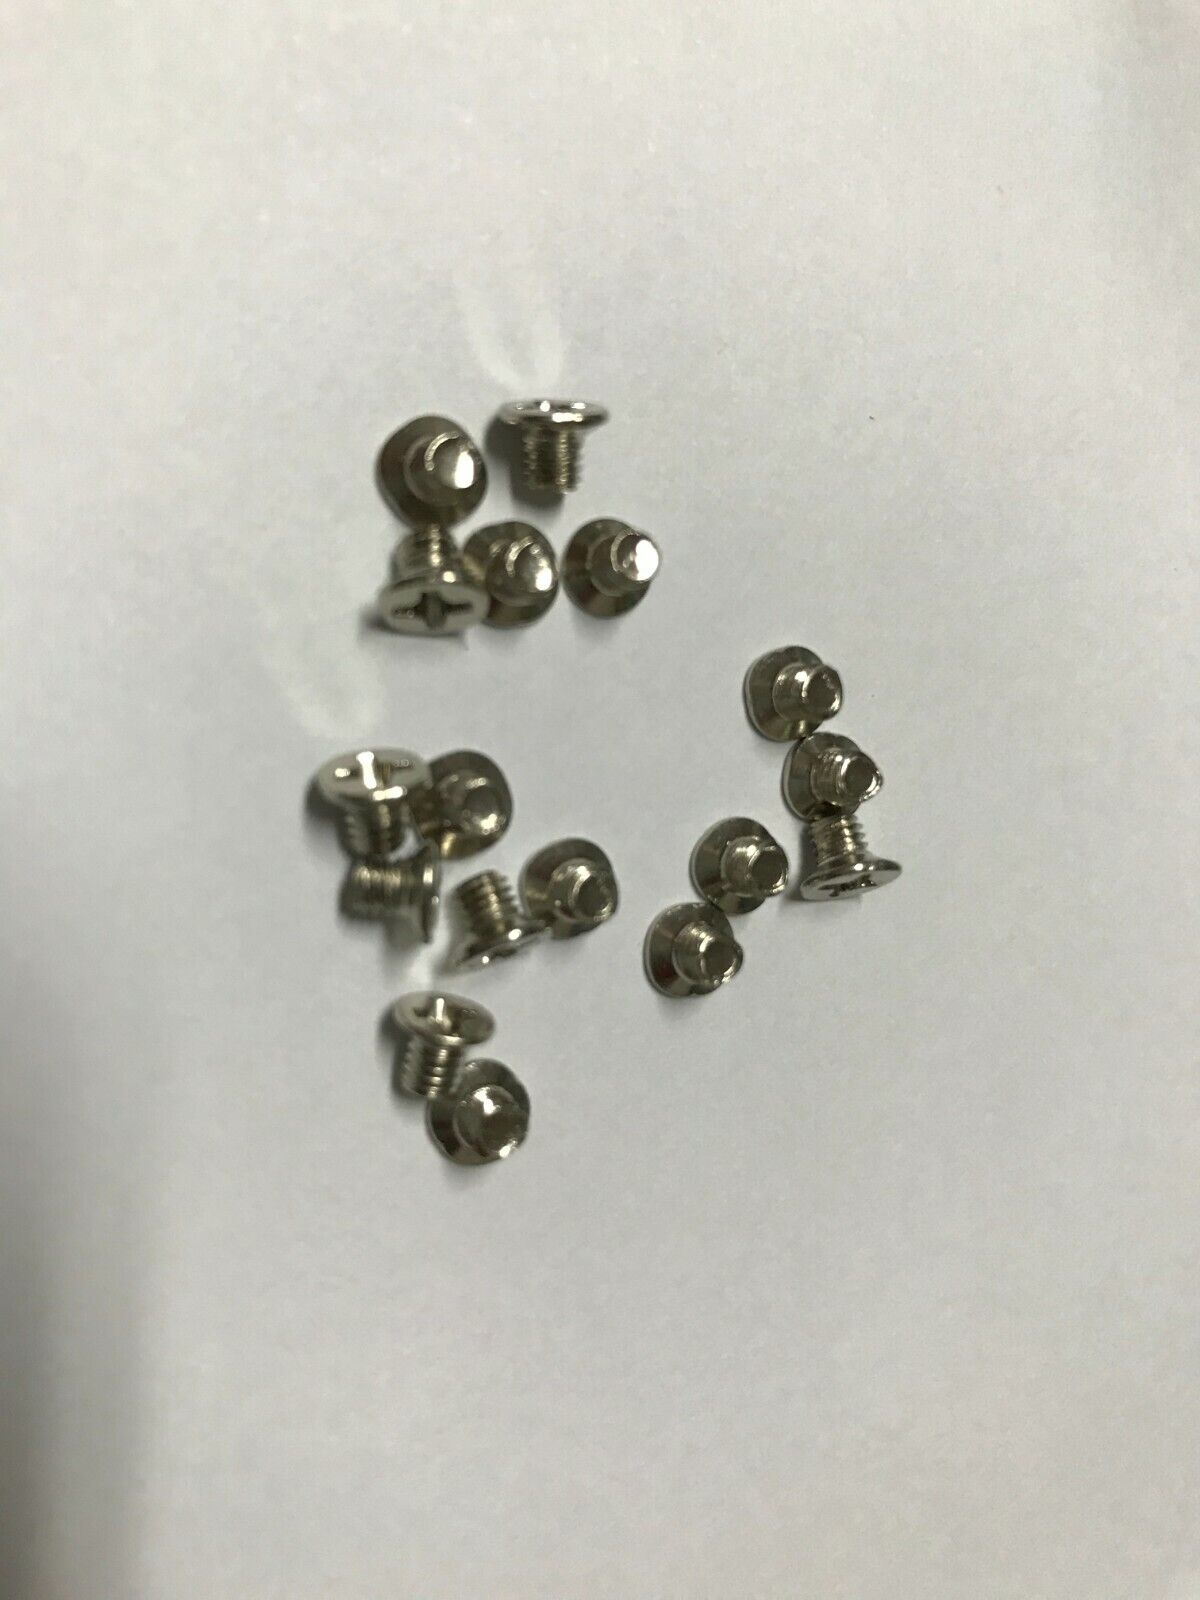 2.5 Hard Drive HDD SSD Mounting Screws For Laptop Computer Lot of 16